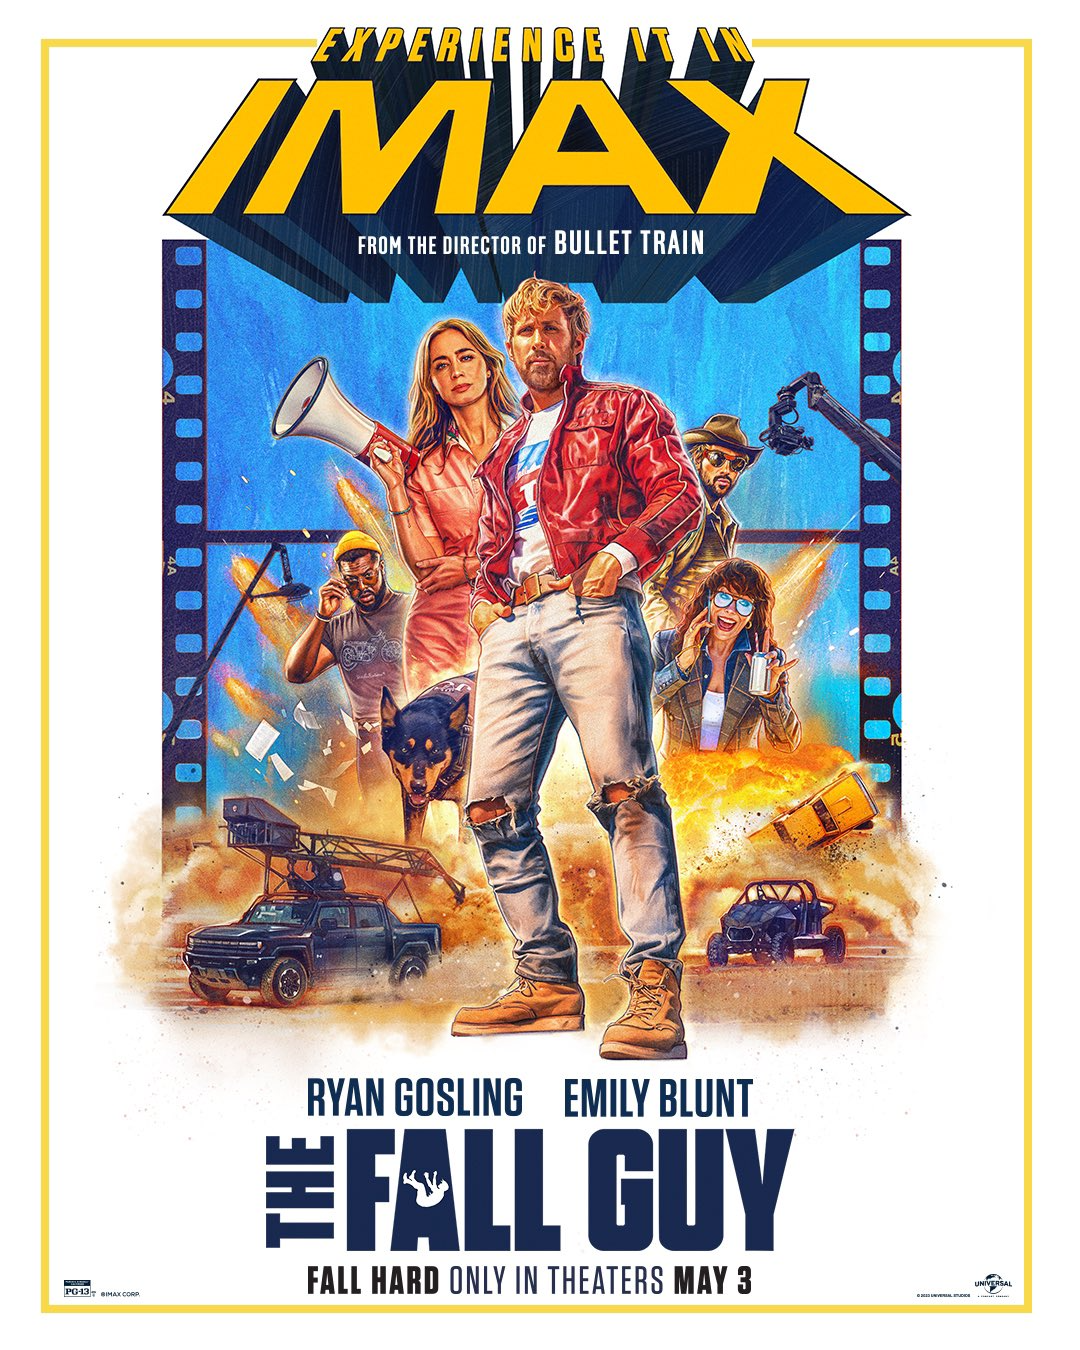 The Fall Guy Imax Poster Shows Ryan Gosling in Throwback Hollywood Style